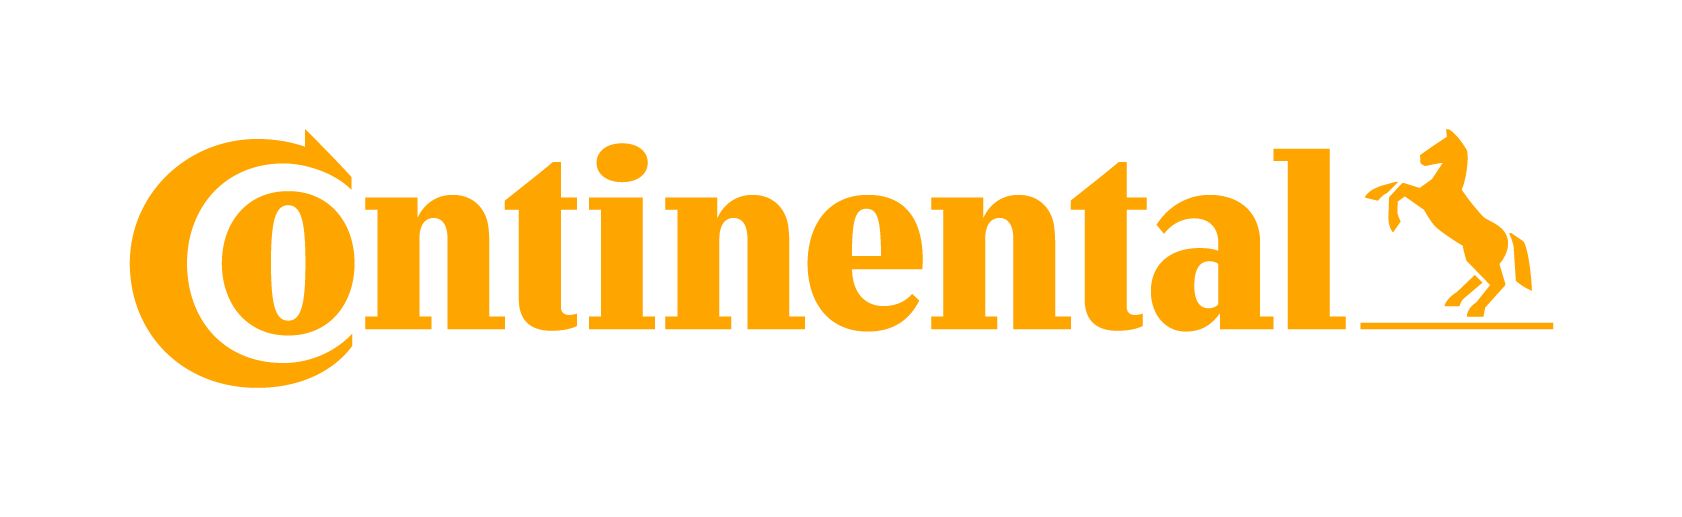 Solutions used by Continental